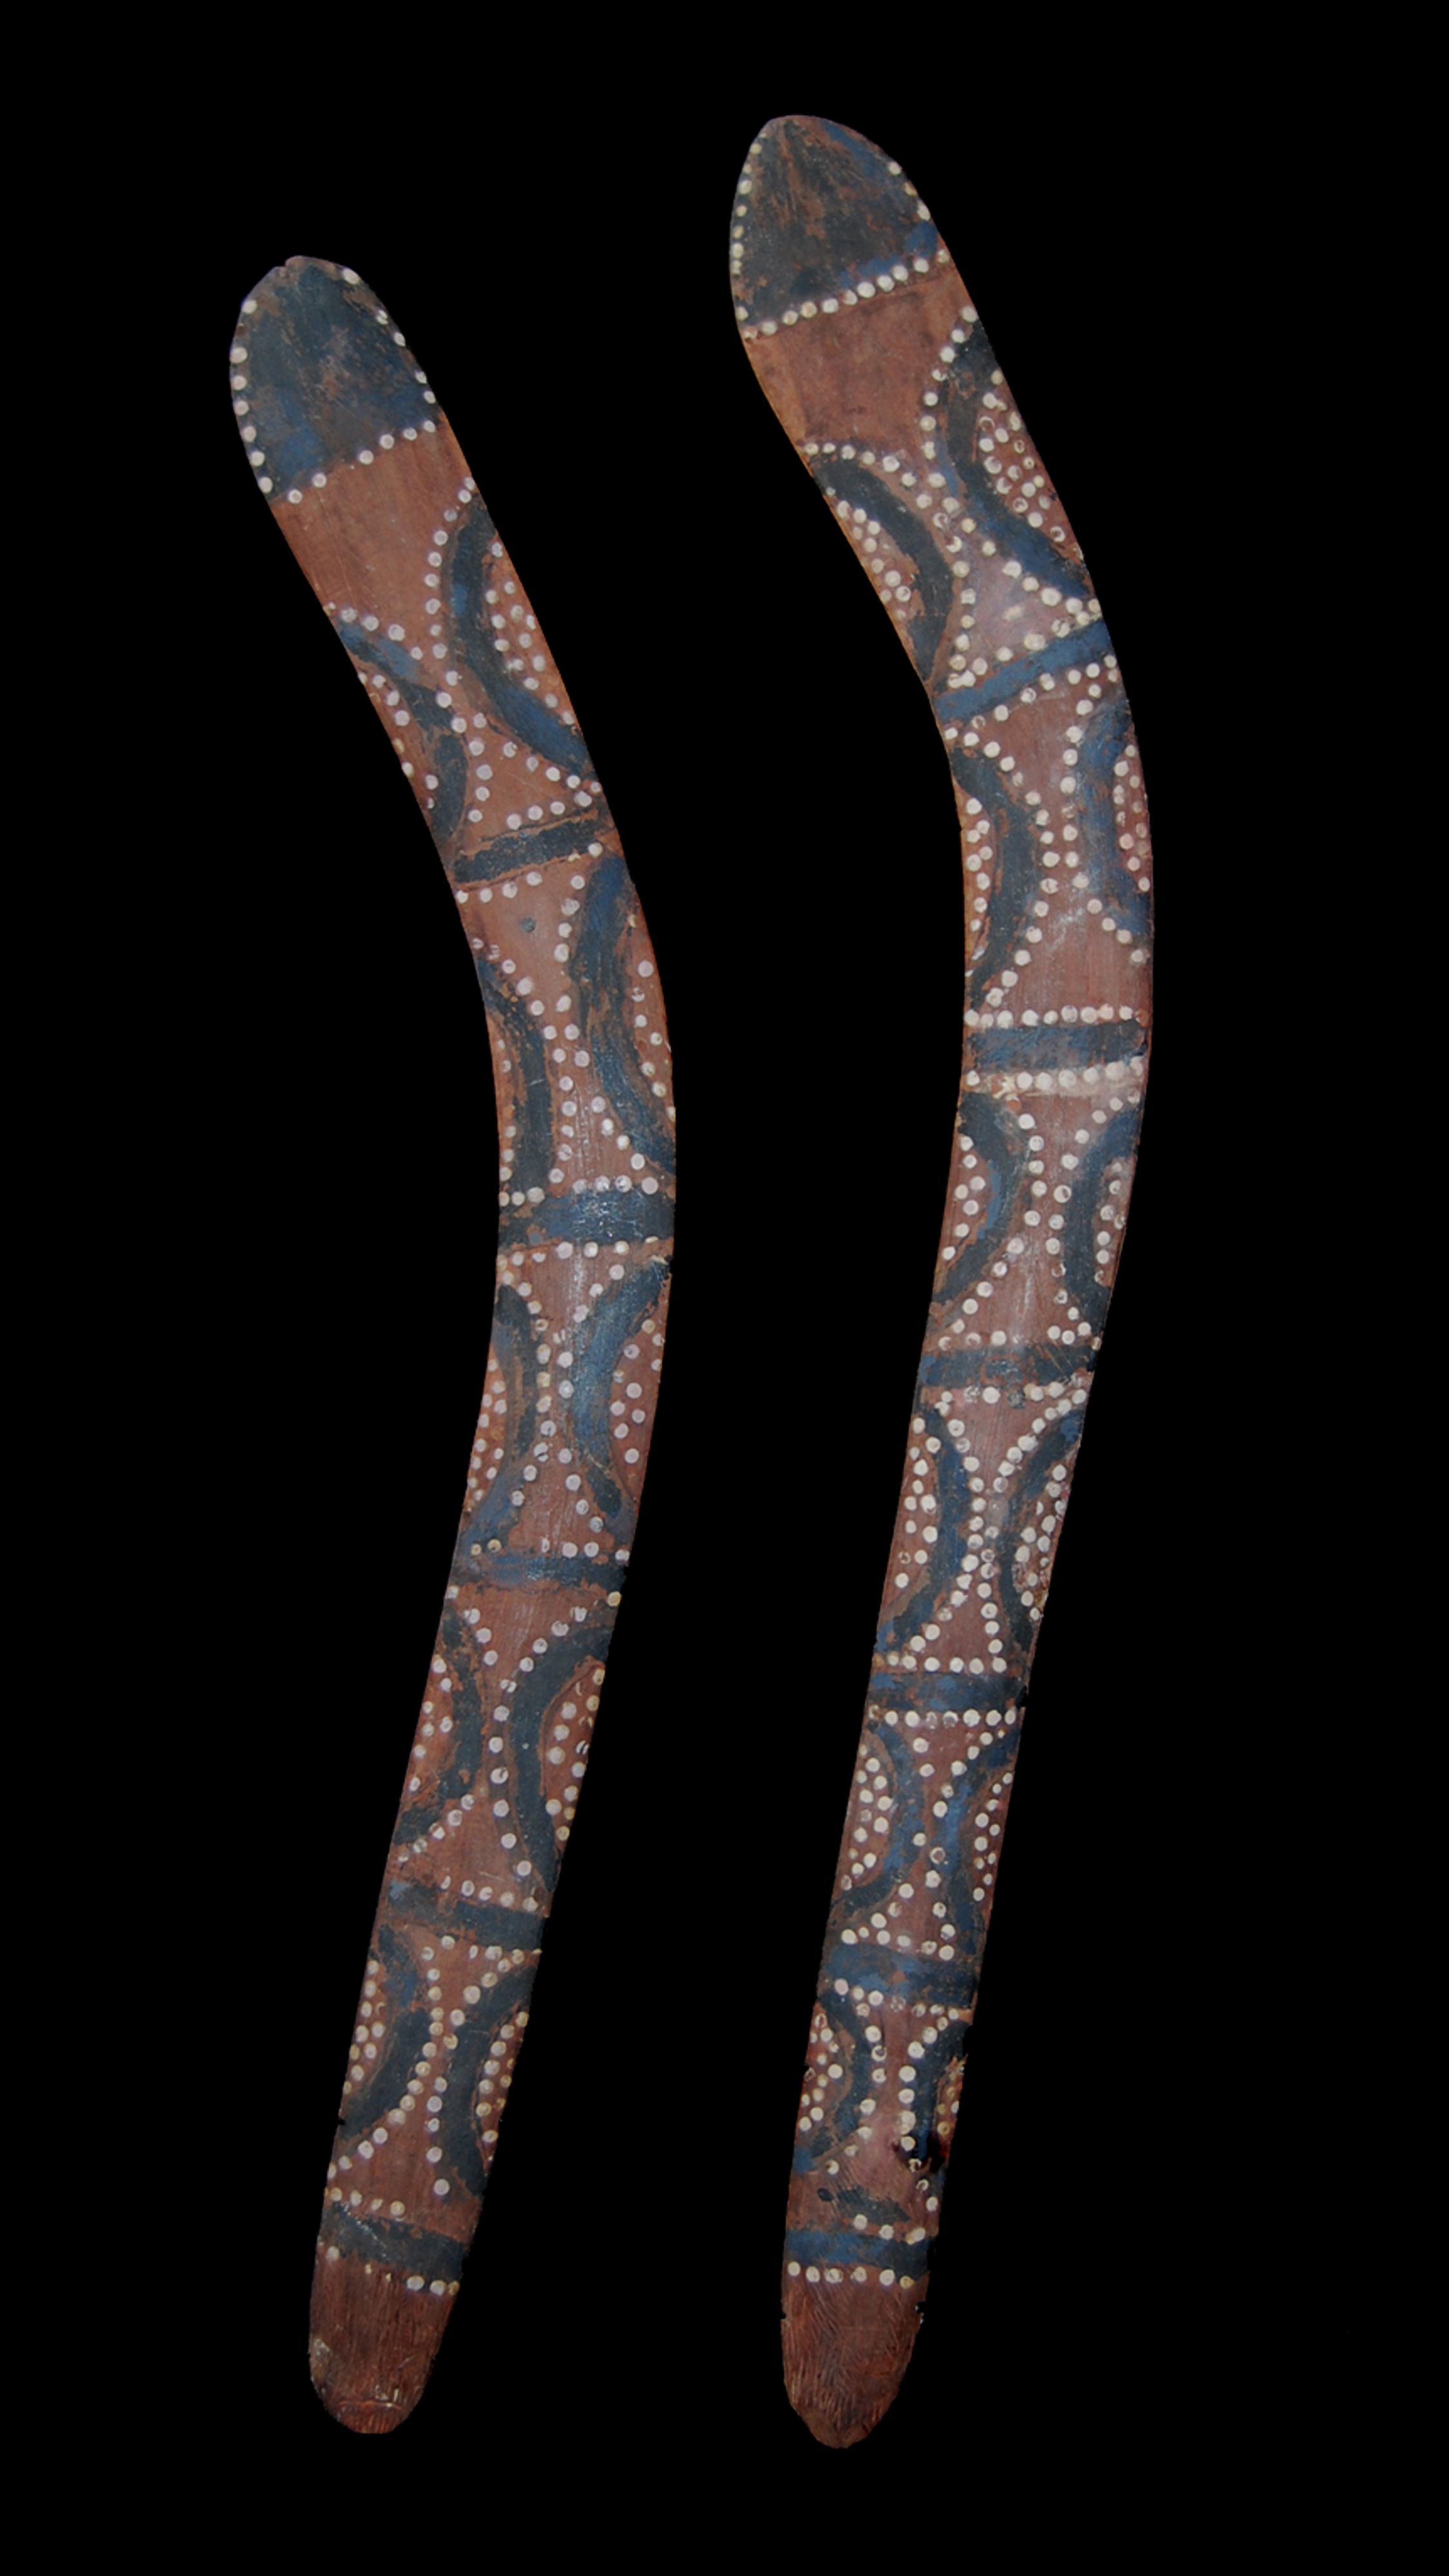 A Pair of Finely Painted Ceremonial Boomerangs from Central Australia